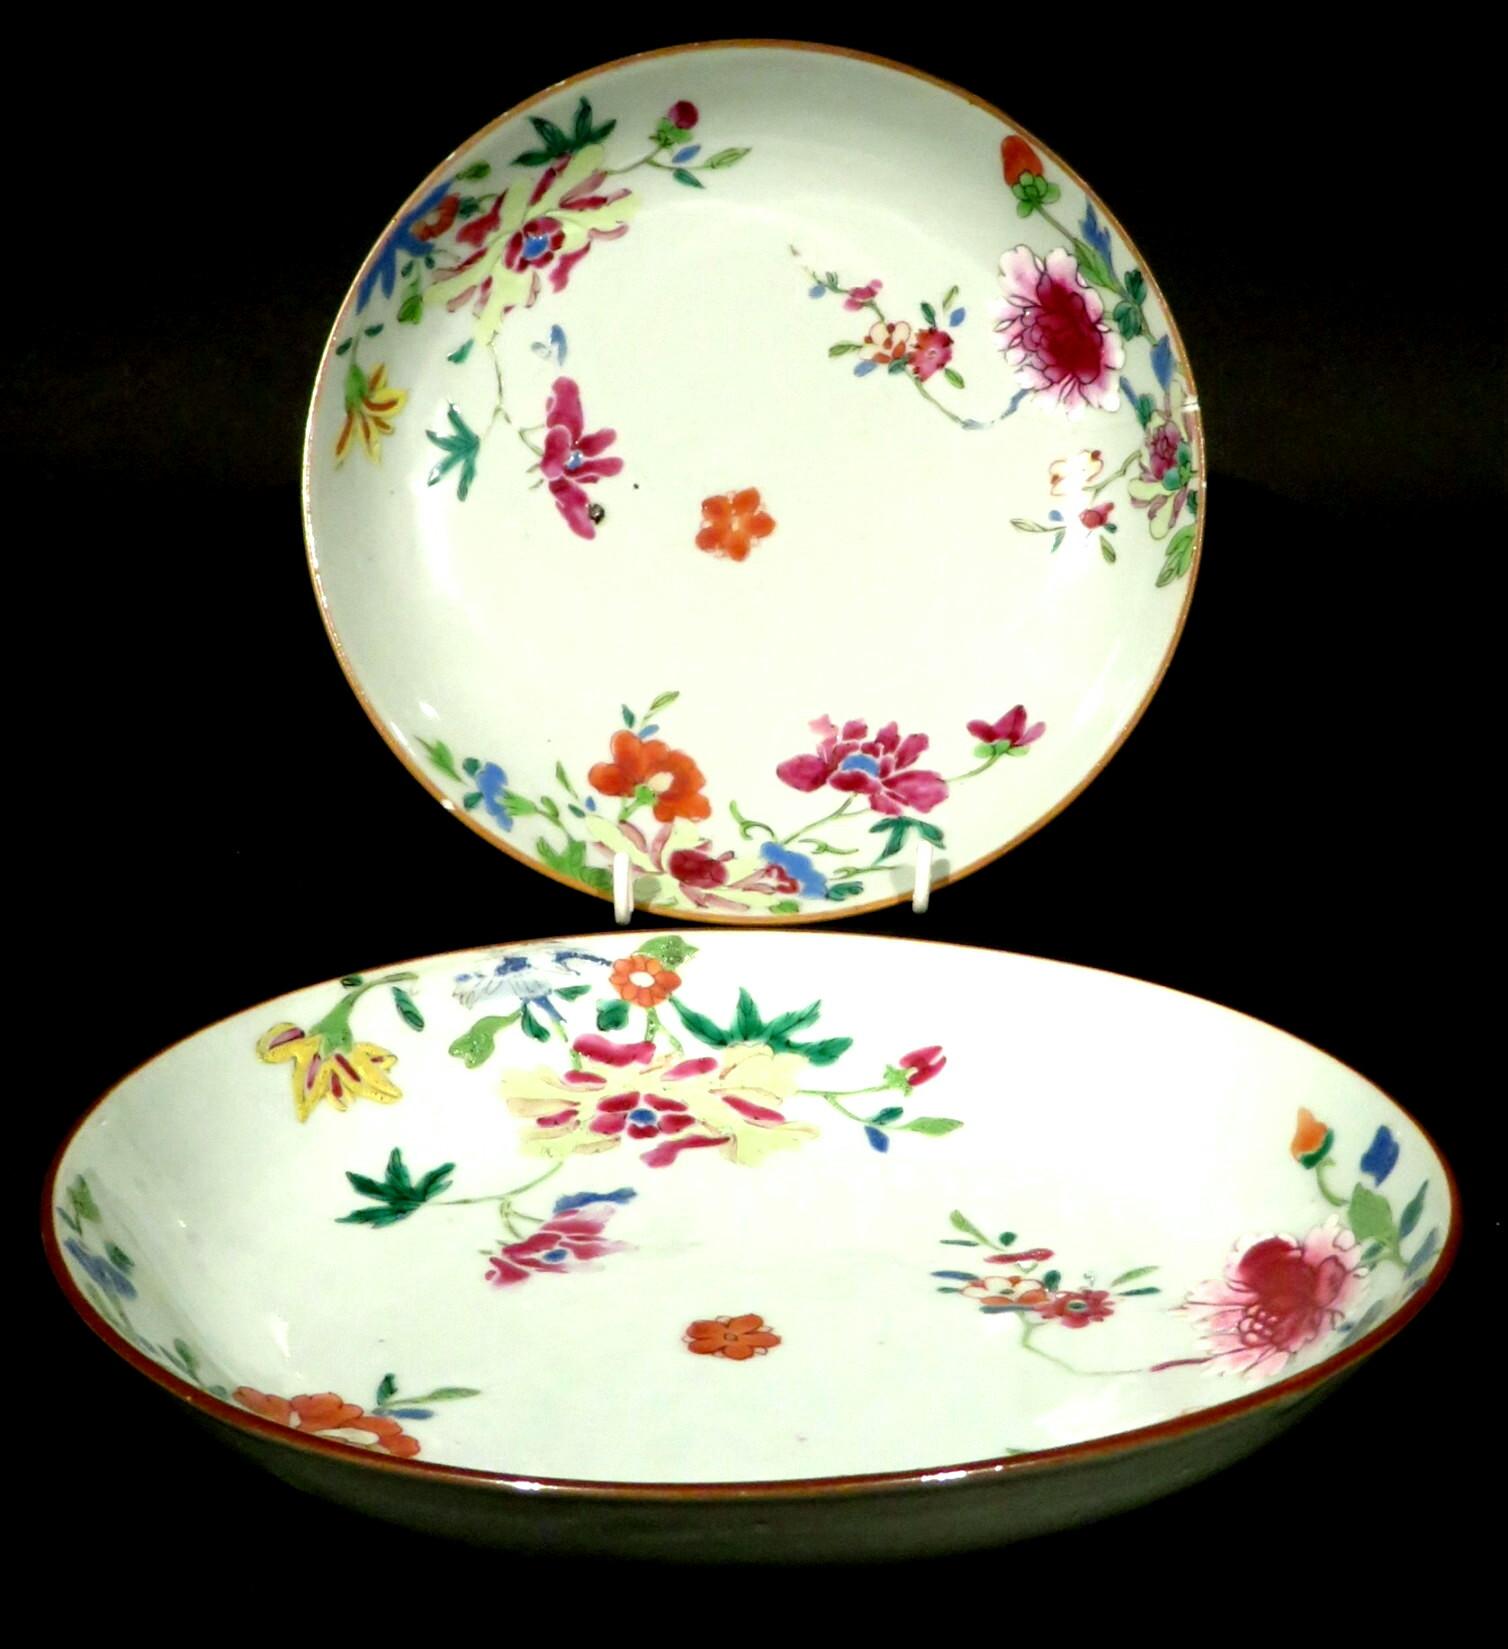 Both saucer-shaped bodies raised on a conforming circular foot, their central fields decorated with a famille rose paellet depicting flower blossoms & foliage, rising up to red oxide edged rims. Both having frits and faint hairline cracks visible on